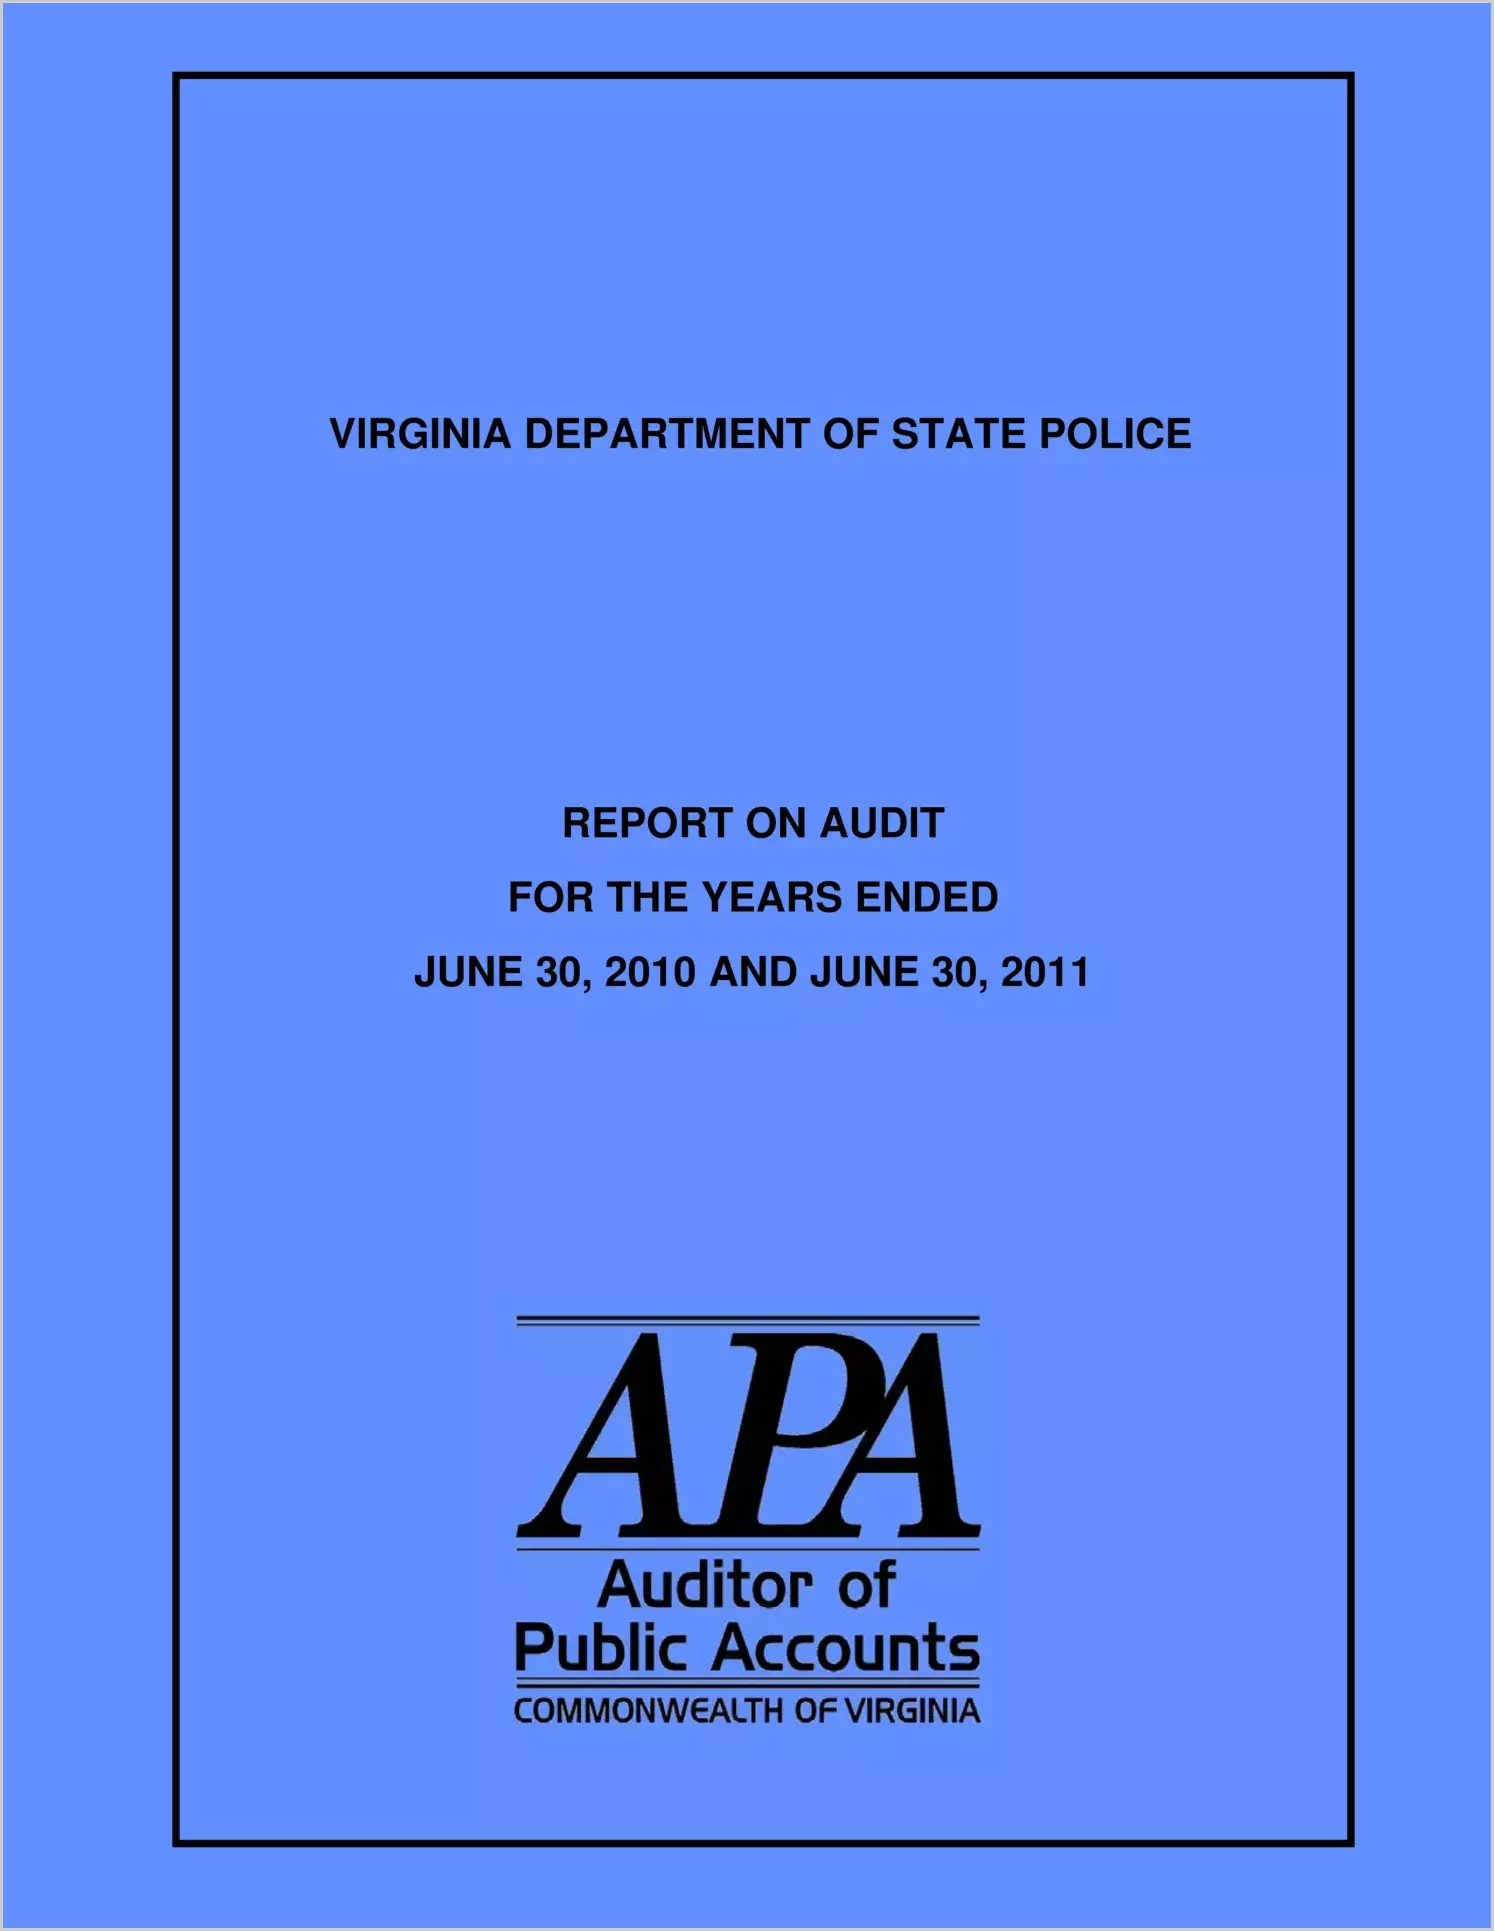 Virginia Department of State Police for the fiscal years ended June 30, 2010 and June 30, 2011